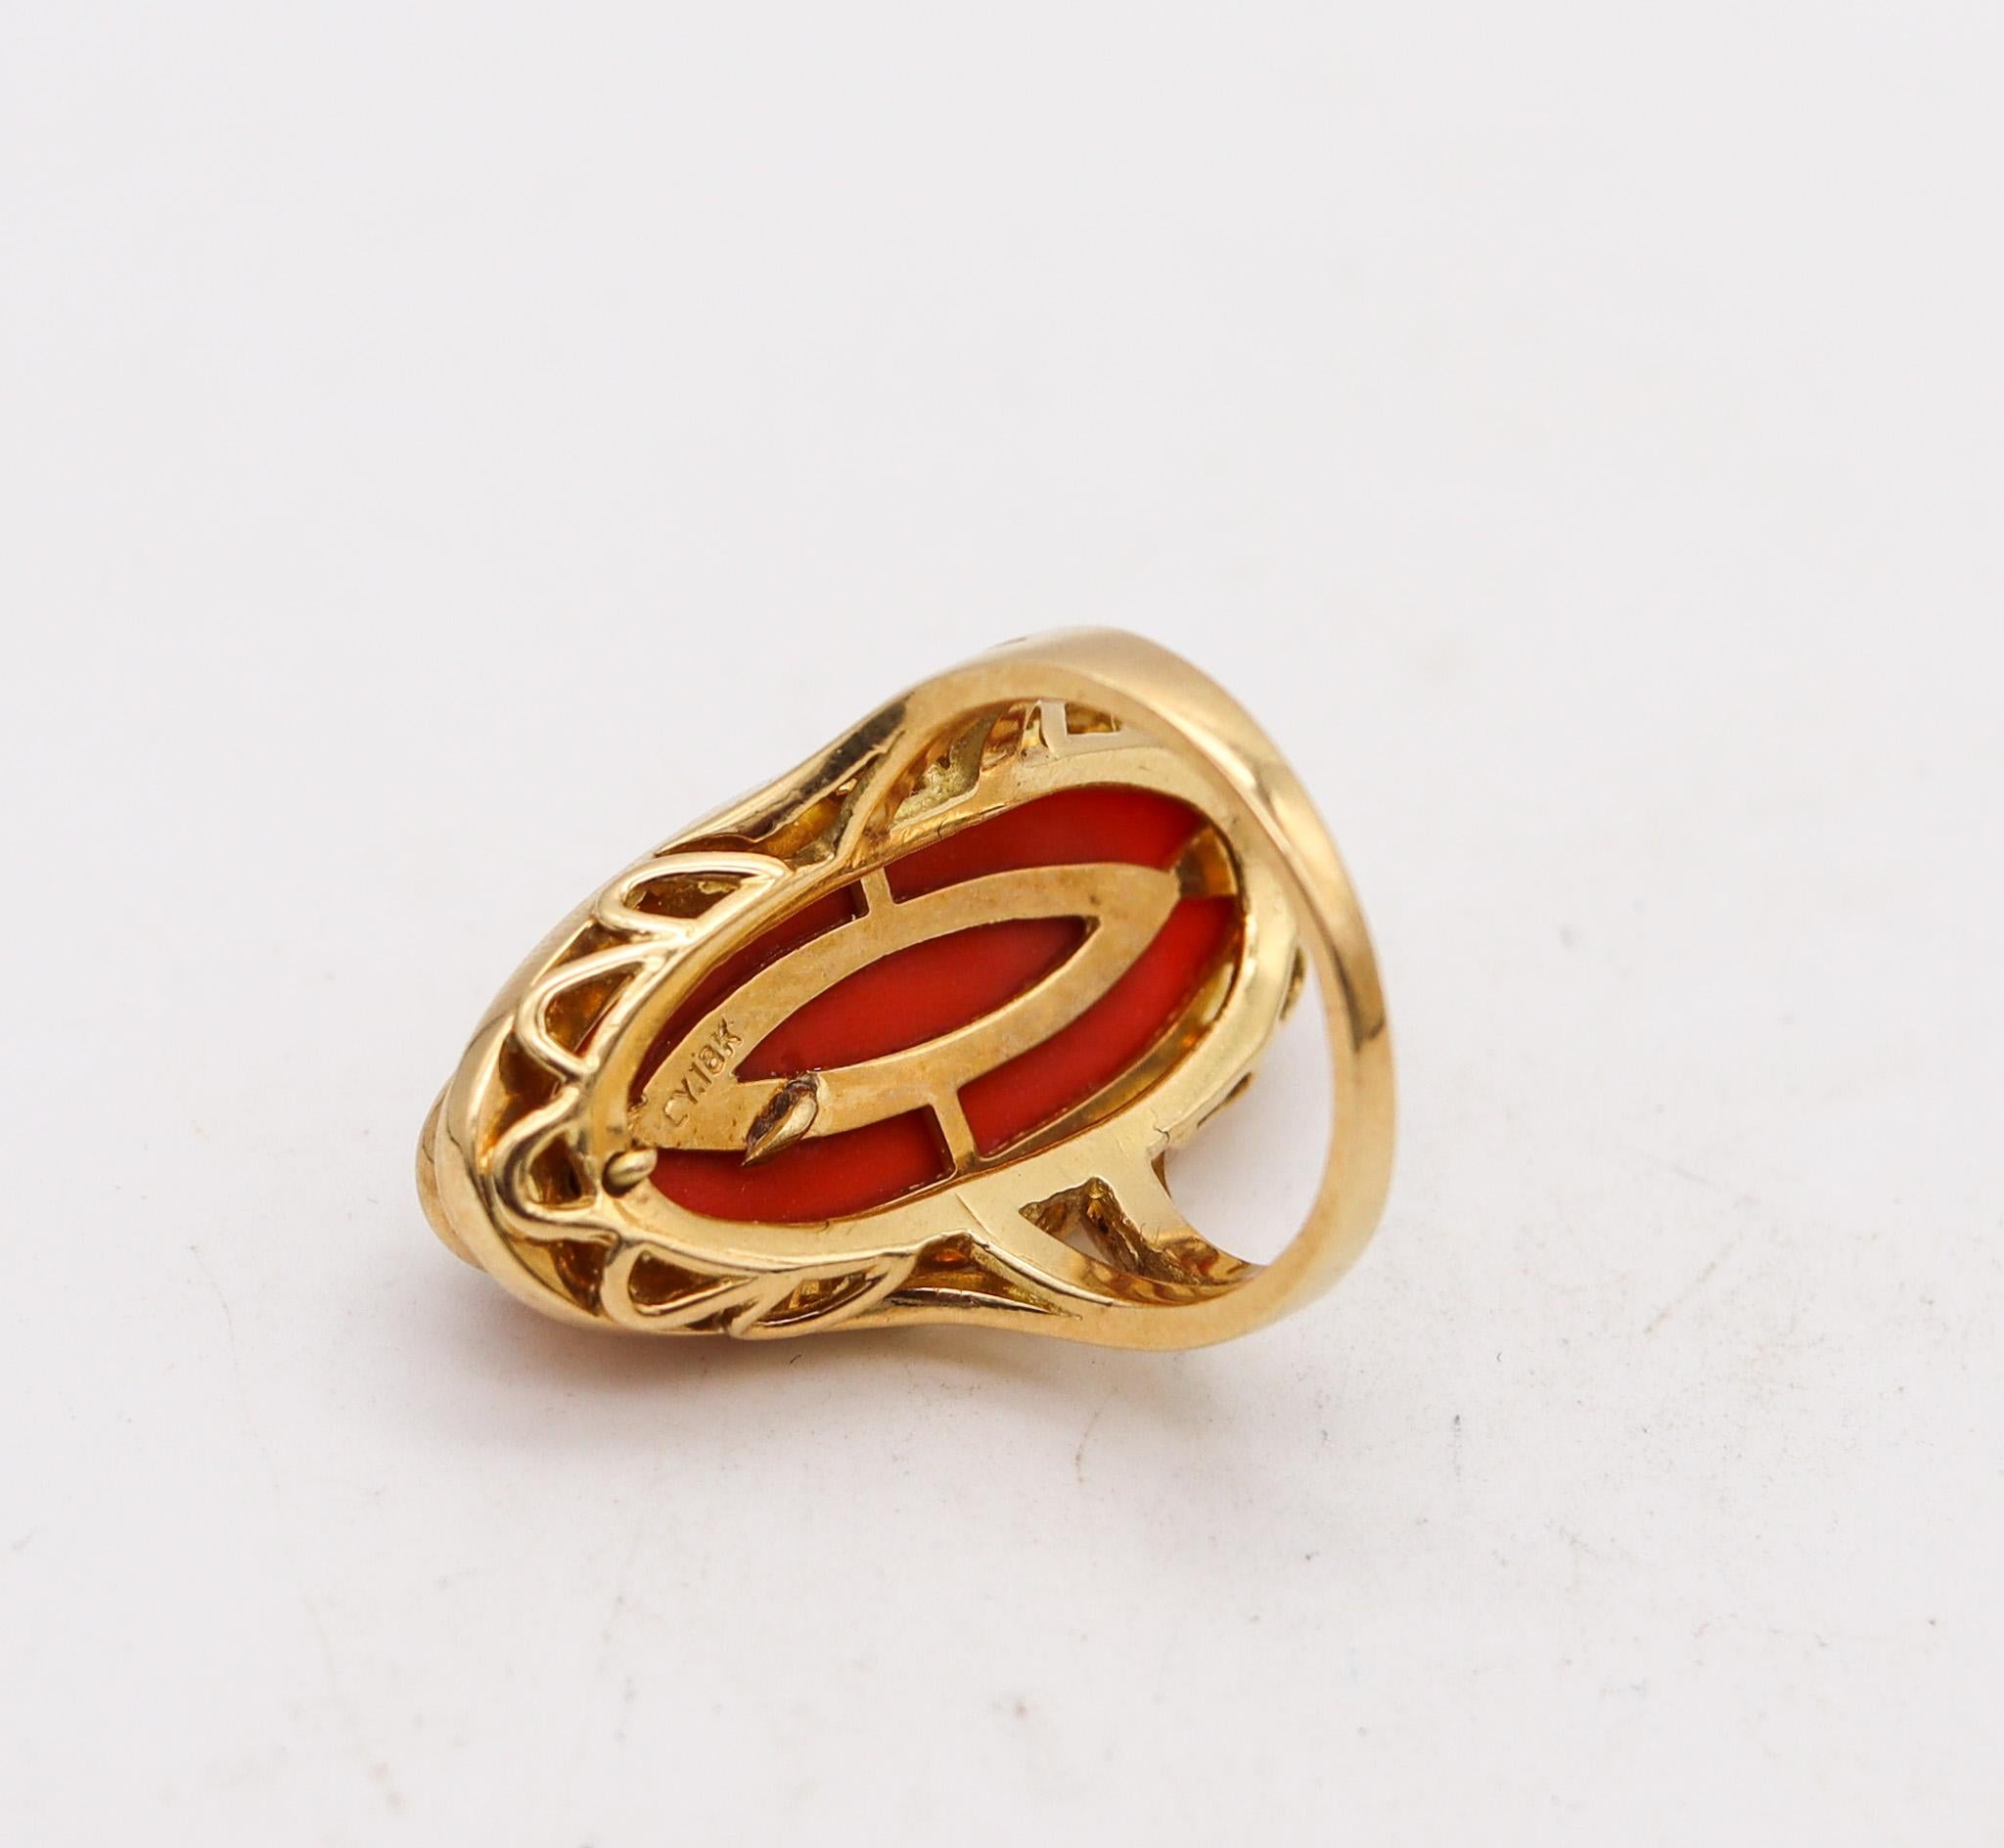 Brilliant Cut Retro Modern 1970 Sculptural Geometric Ring In 18Kt Gold With Diamonds And Coral